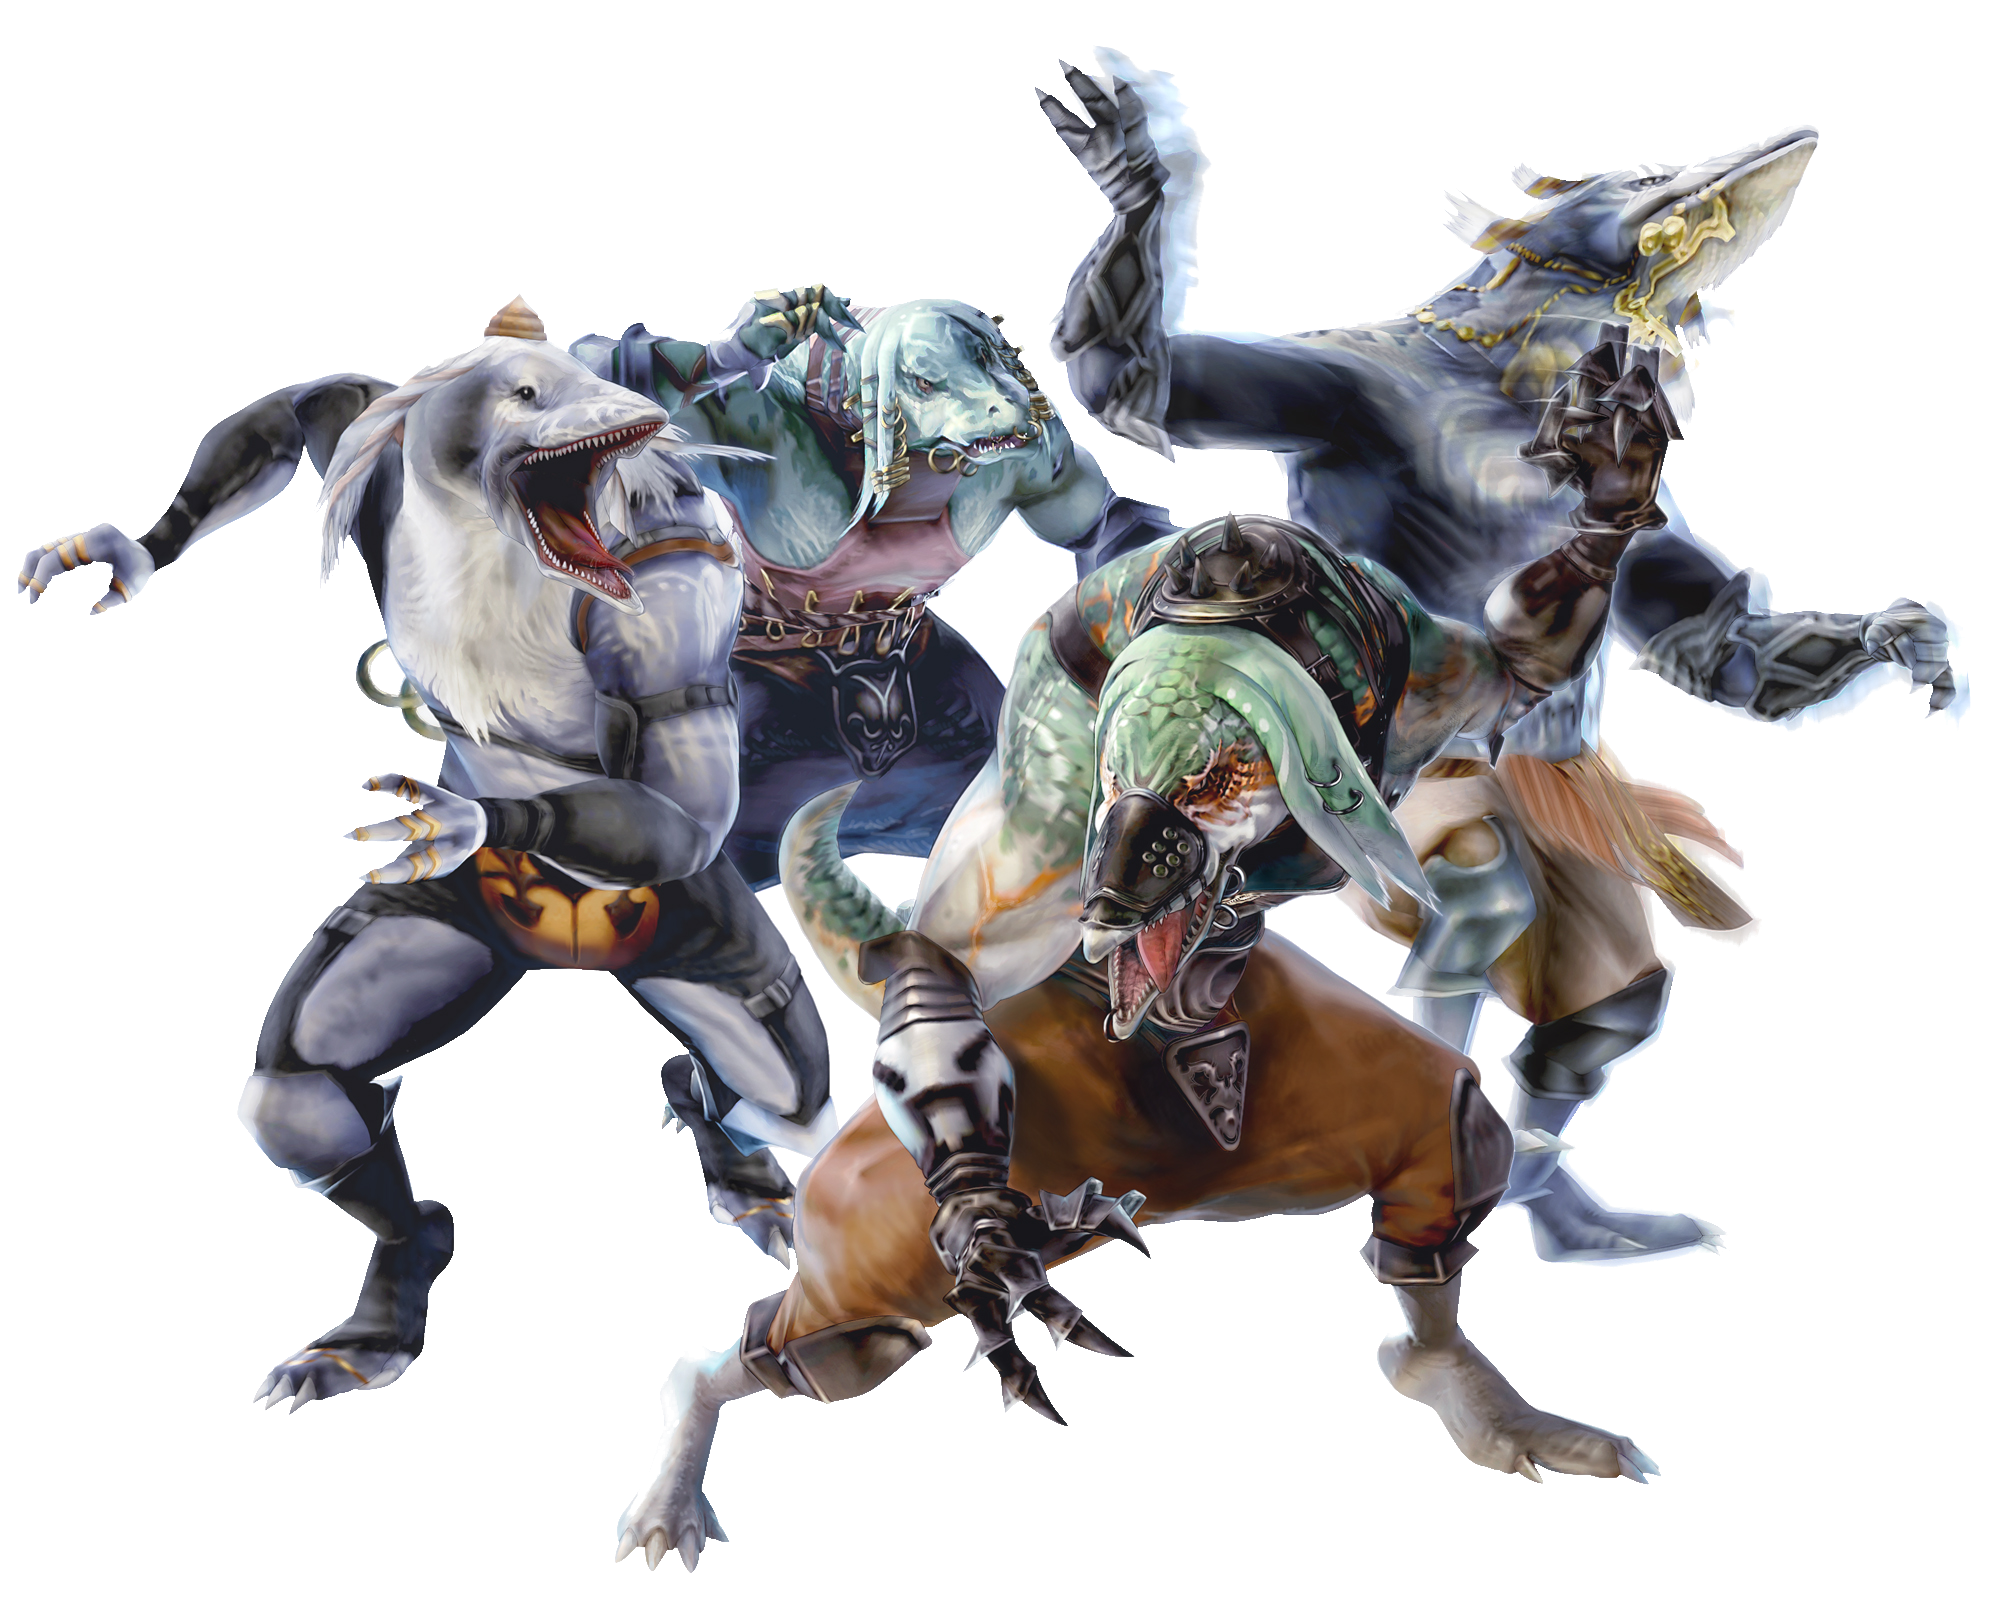 The bangaa is a race in the Final Fantasy series, primarily from Ivalice. 